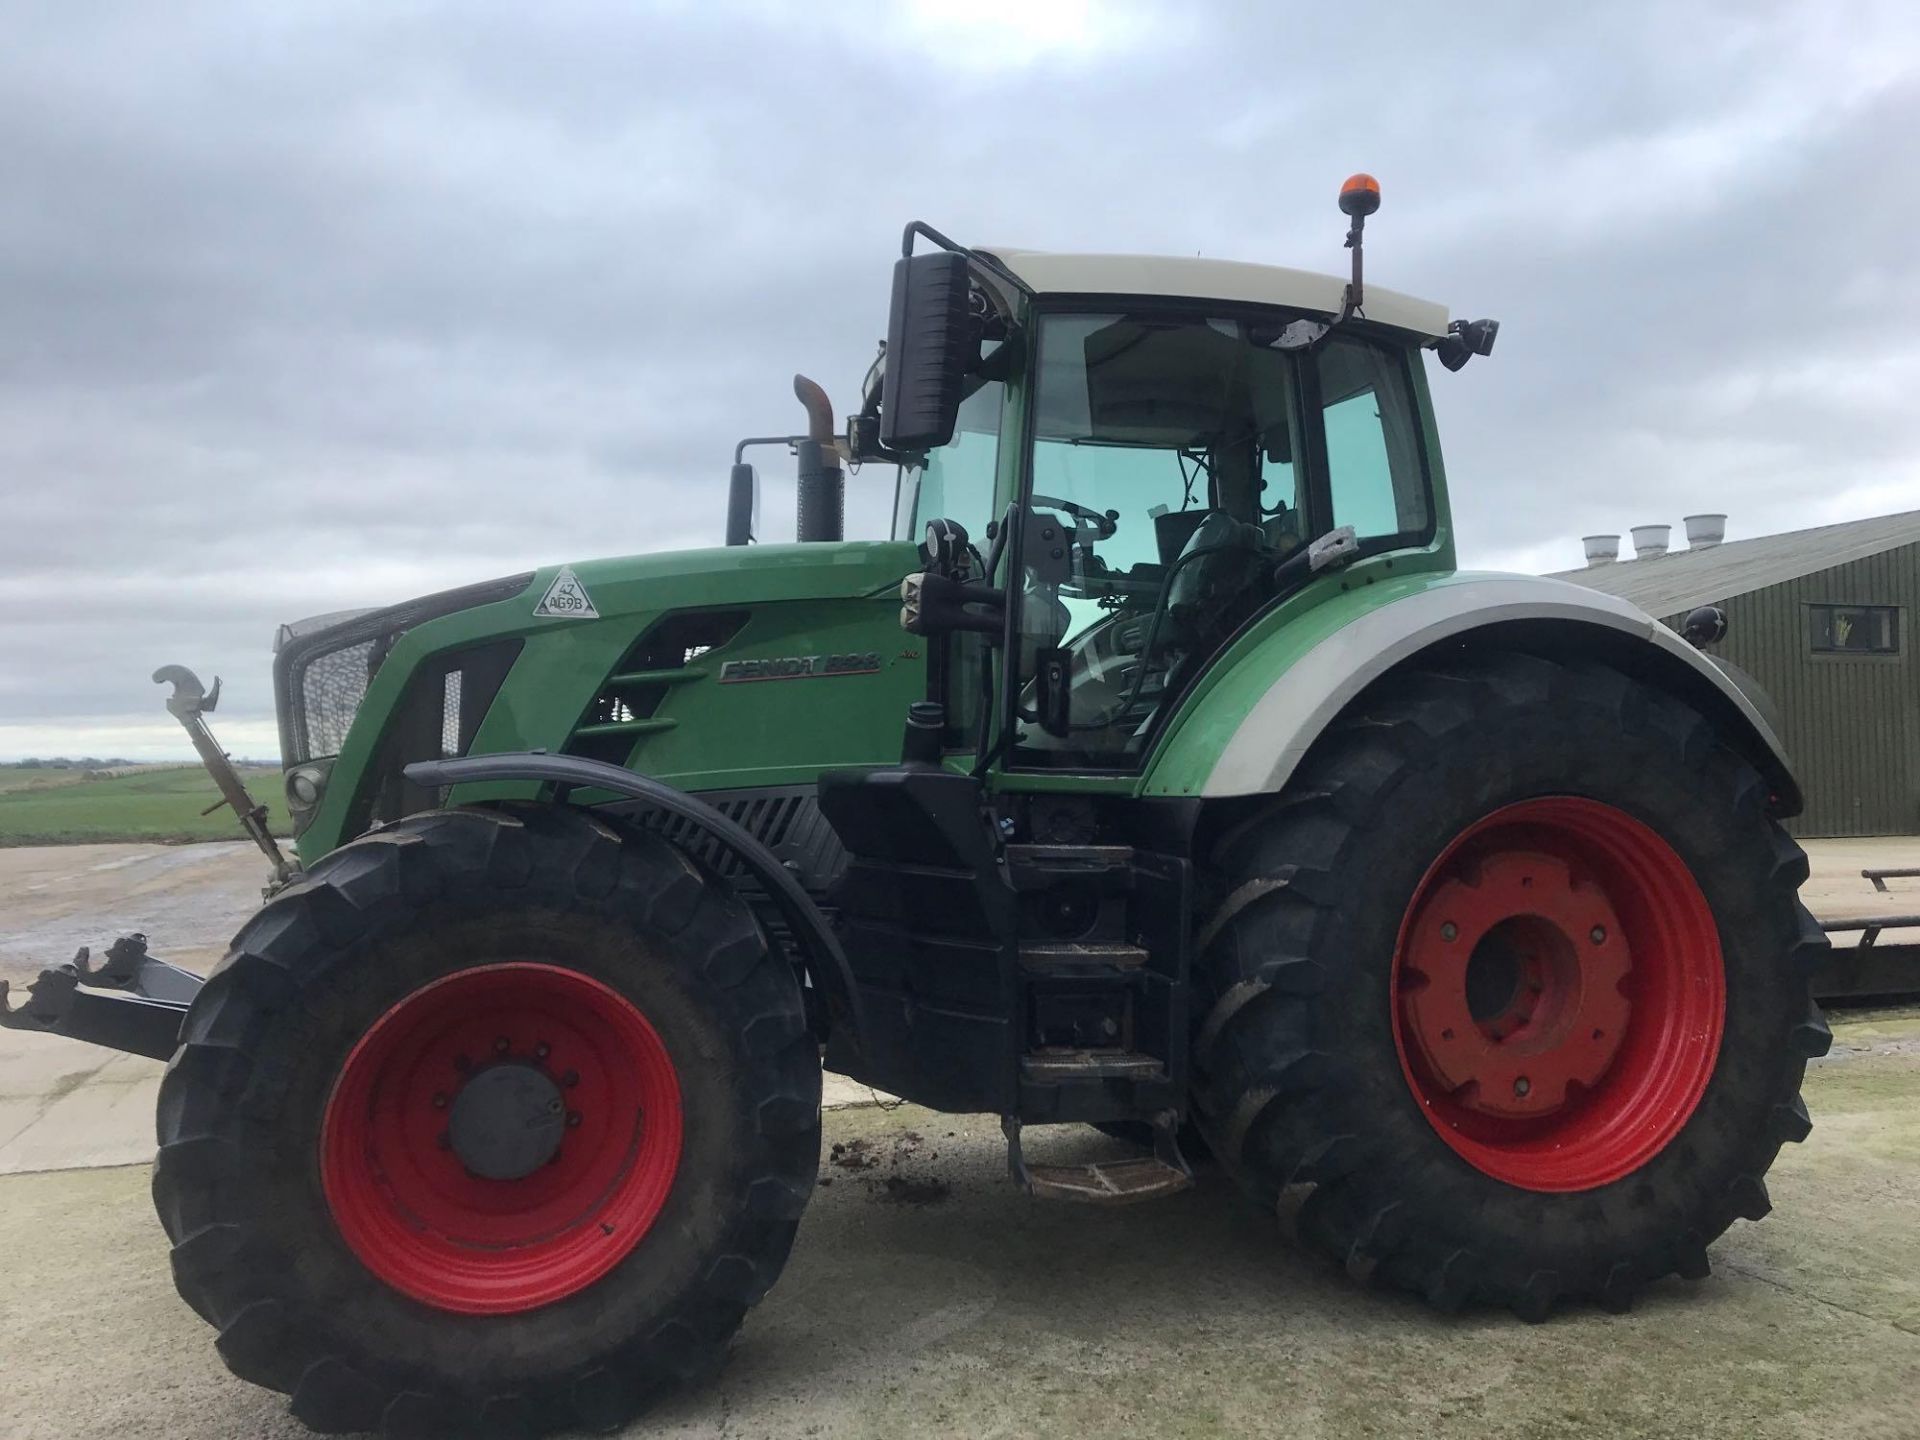 2013 Fendt 828 Vario tractor, 4wd, front linkage, front spool valves, 4No rear spool valves, Bill Be - Image 4 of 23